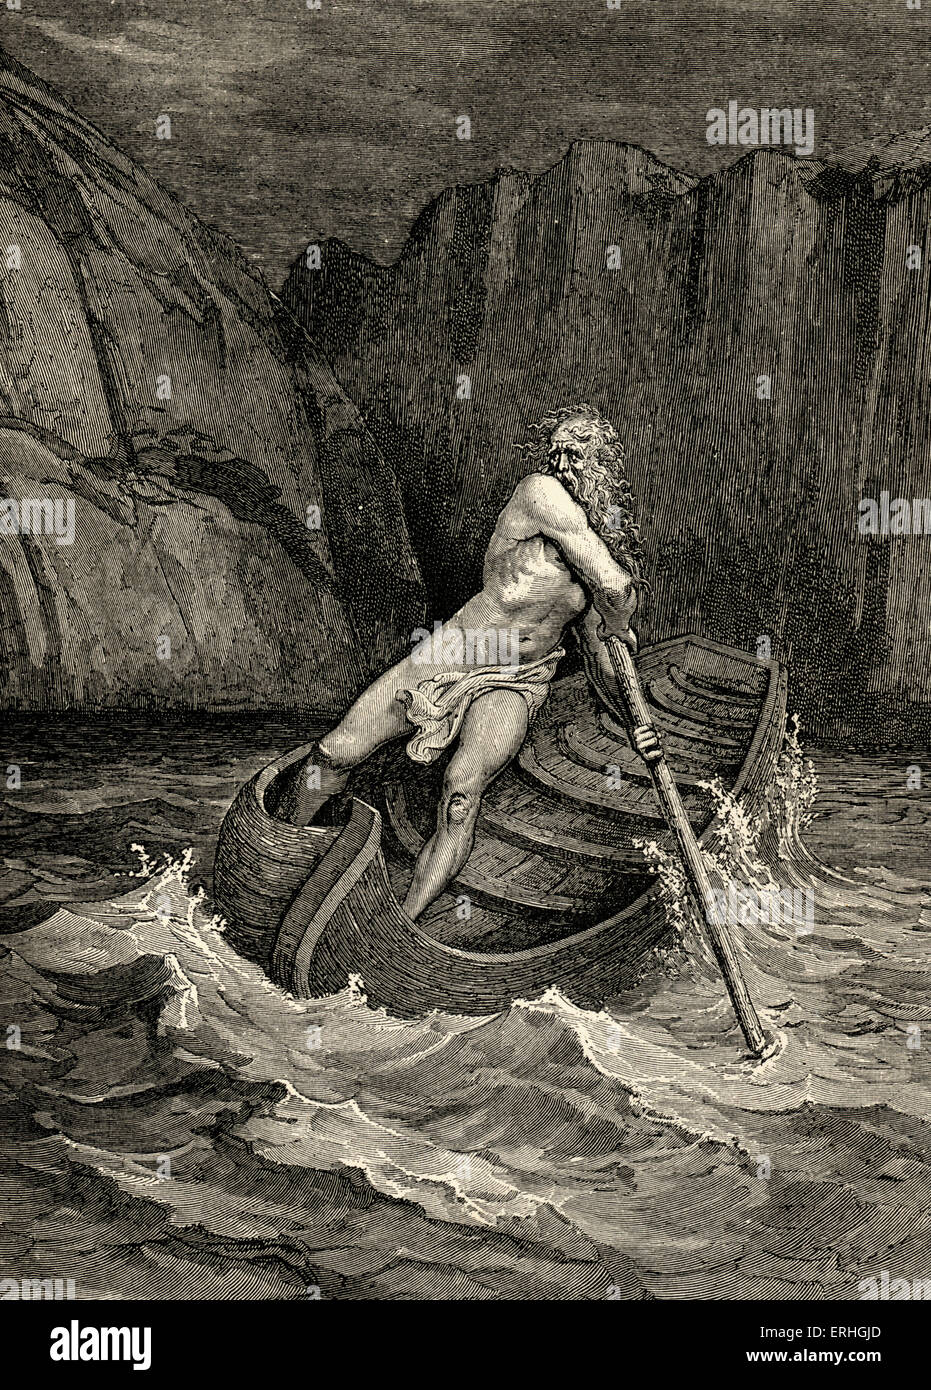 Charon - Study for Canto 3, Dante's Inferno Drawing by Eric